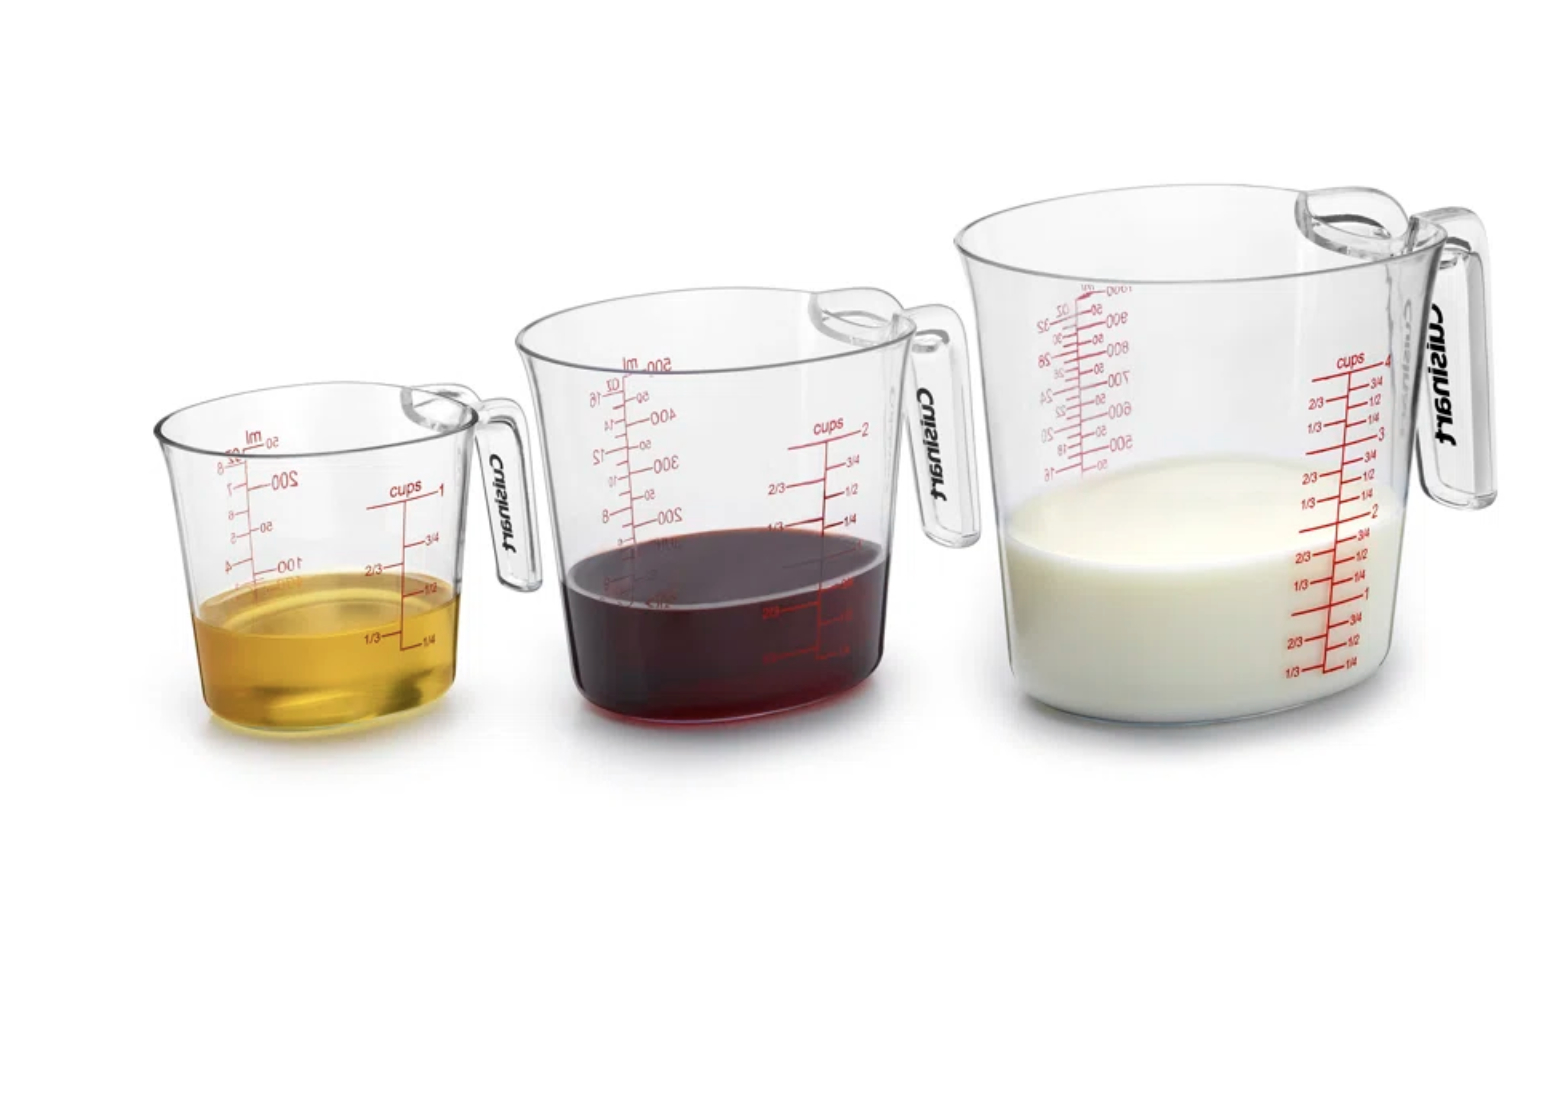 Three measuring cups with different liquid levels for shopping